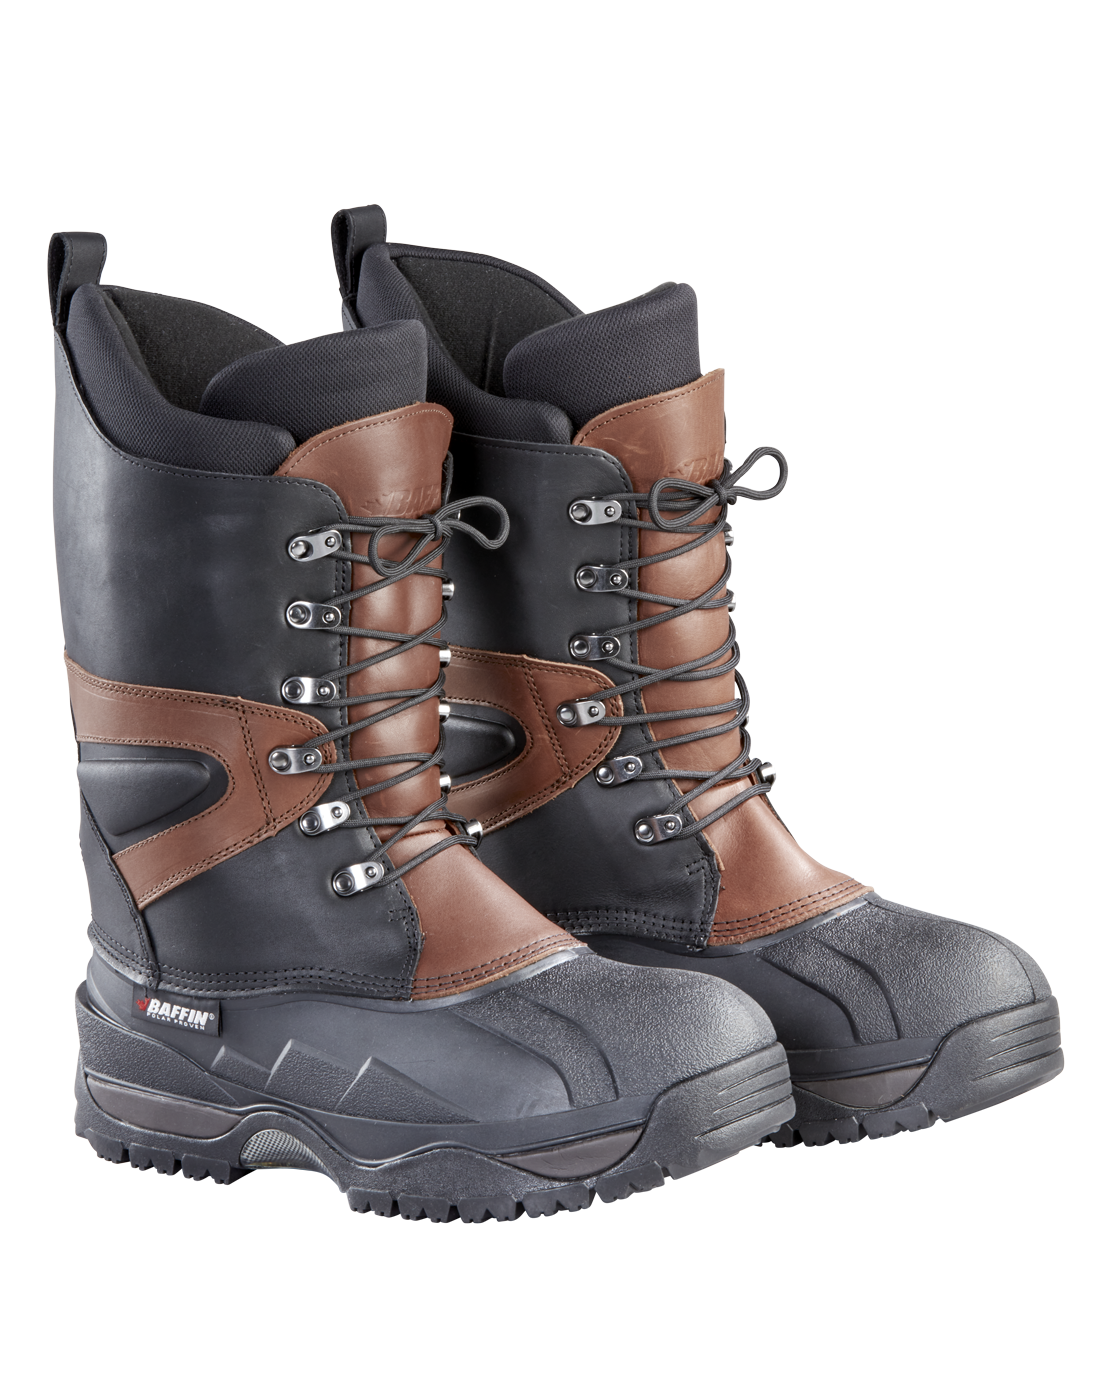 Boots - Baffin Apex, Pin Expedition Collection -70C, Mens Sizes 7-15 ...